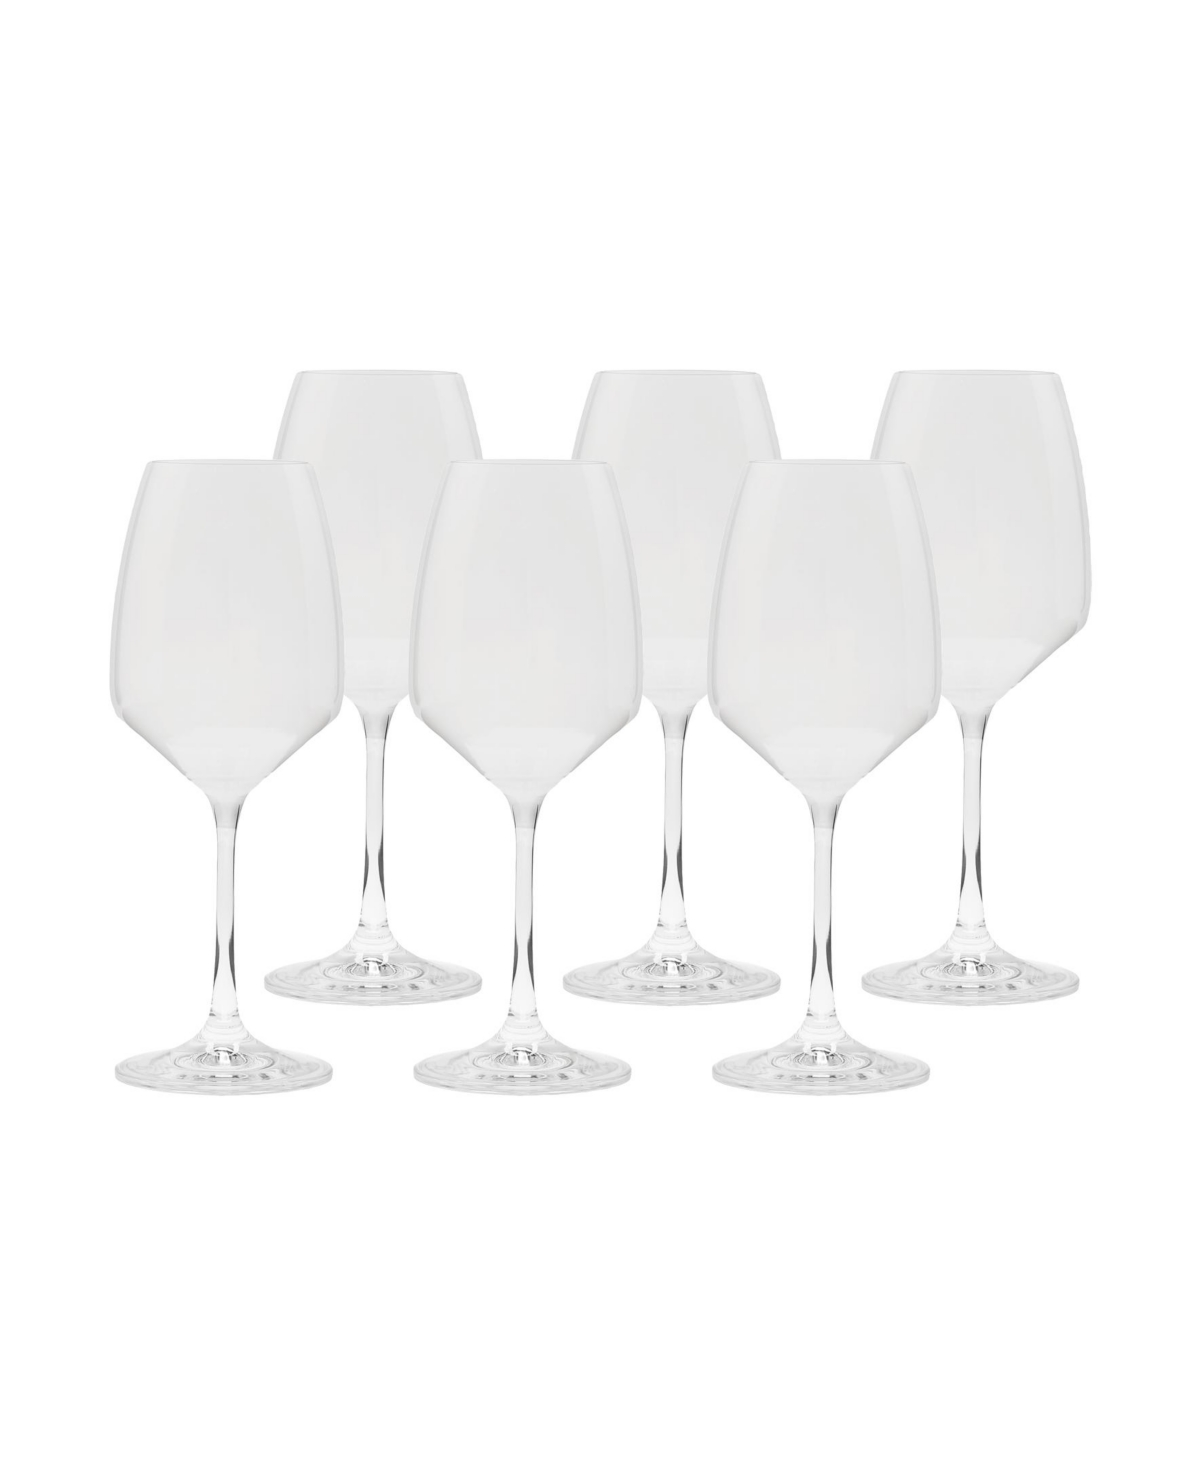 Shop Classic Touch White Water Glasses With Stem 9.5", Set Of 6